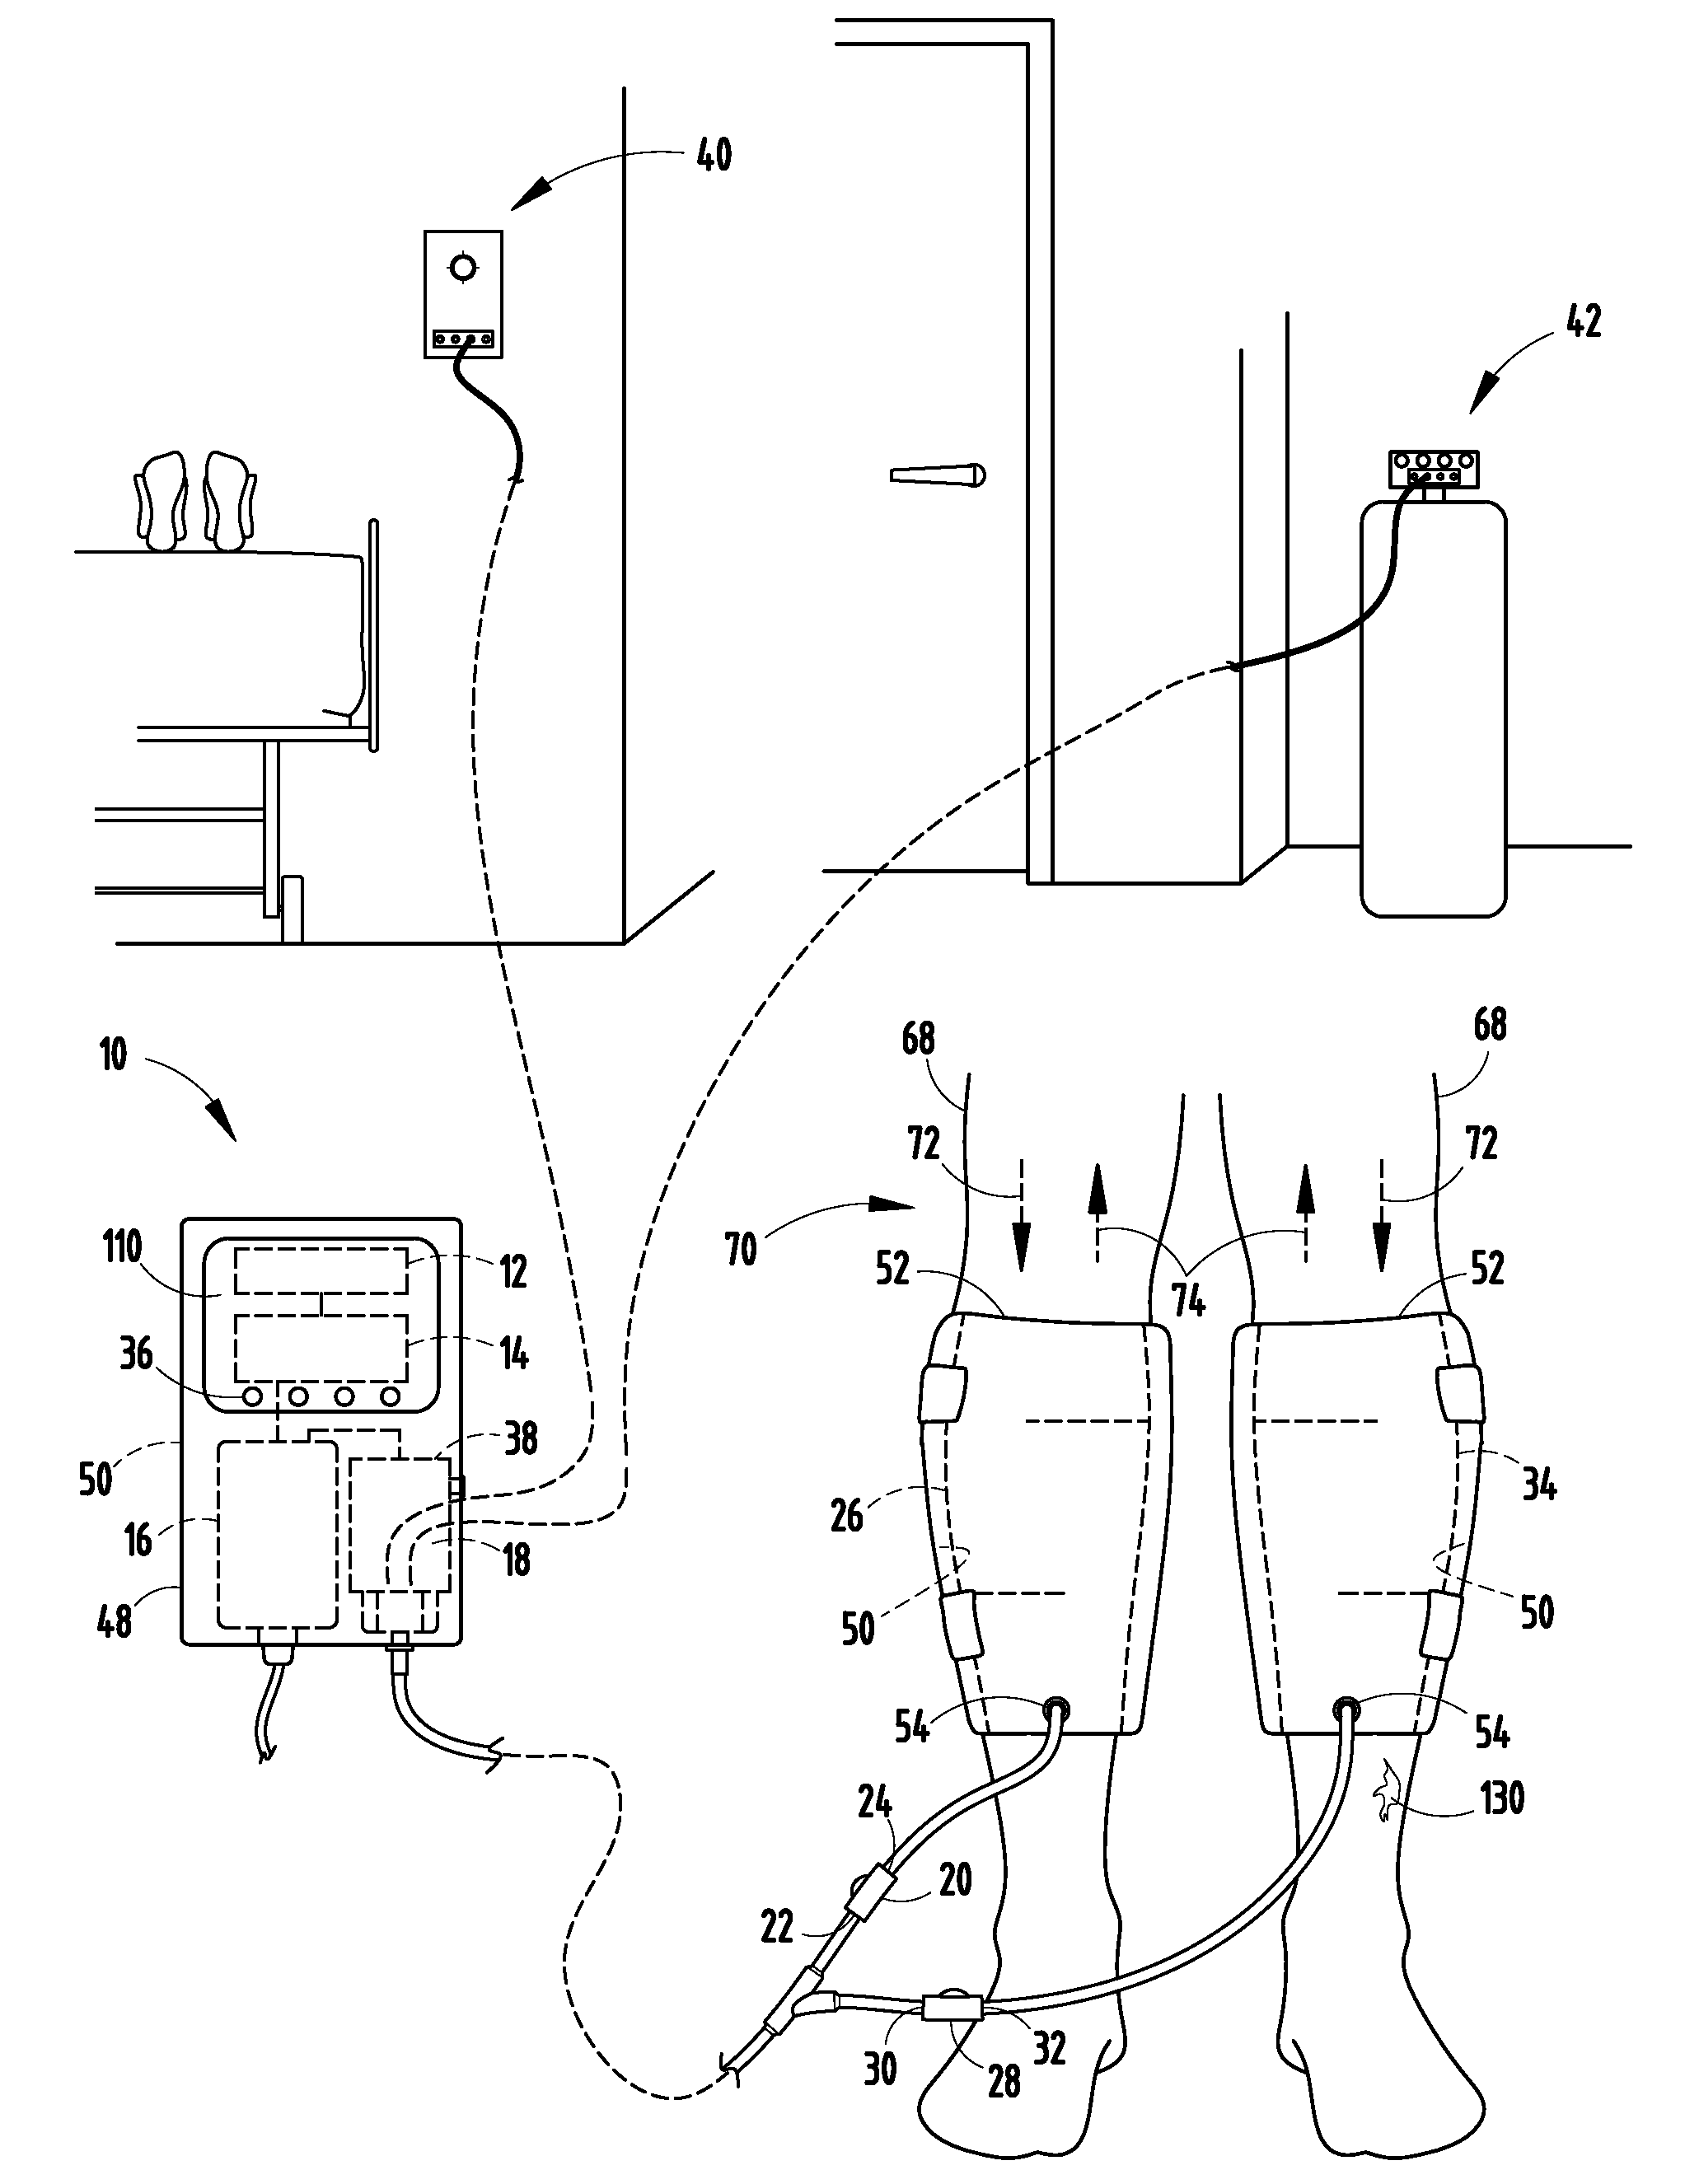 Compression device and control system for applying pressure to a limb of a living being